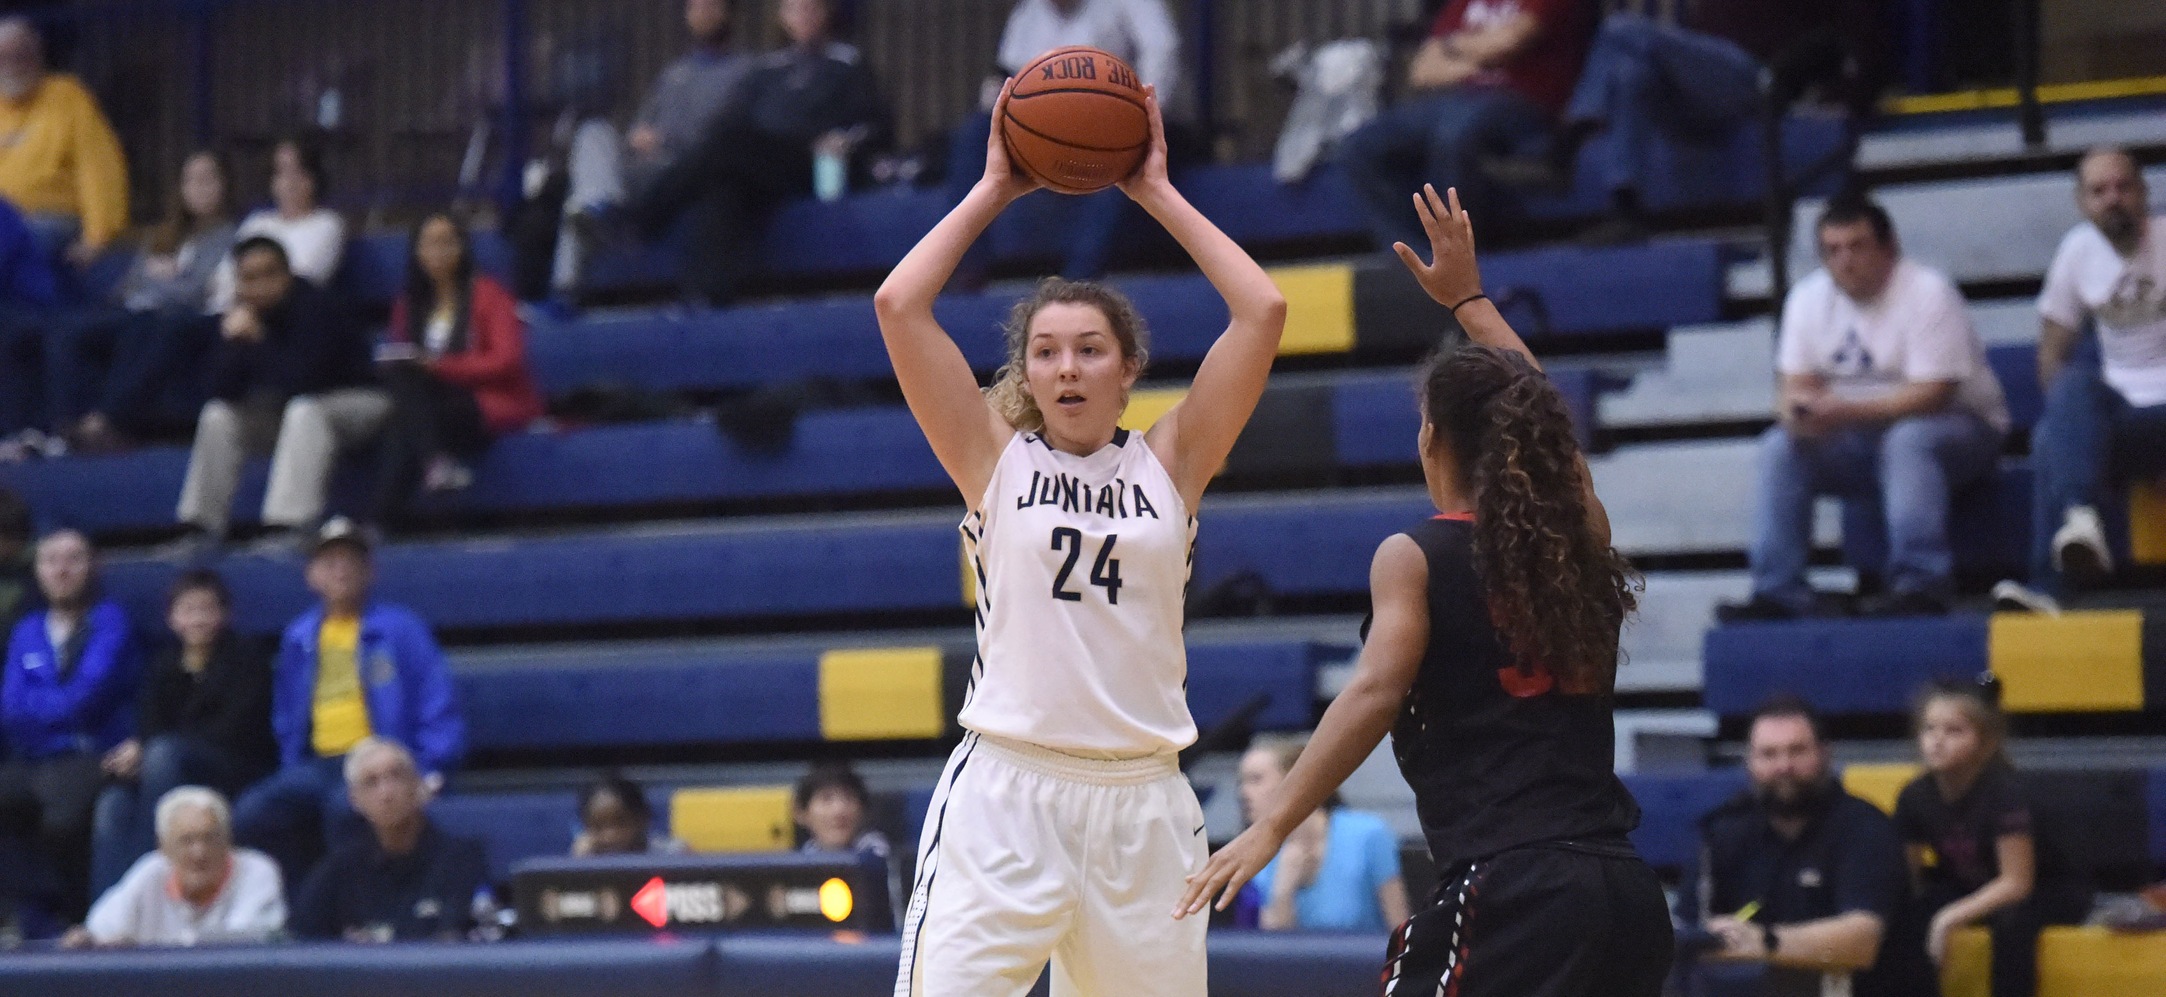 Morgan Instone had a team-high 11 points with five blocks as Juniata advanced past Piedmont in the NCAA Tournament.